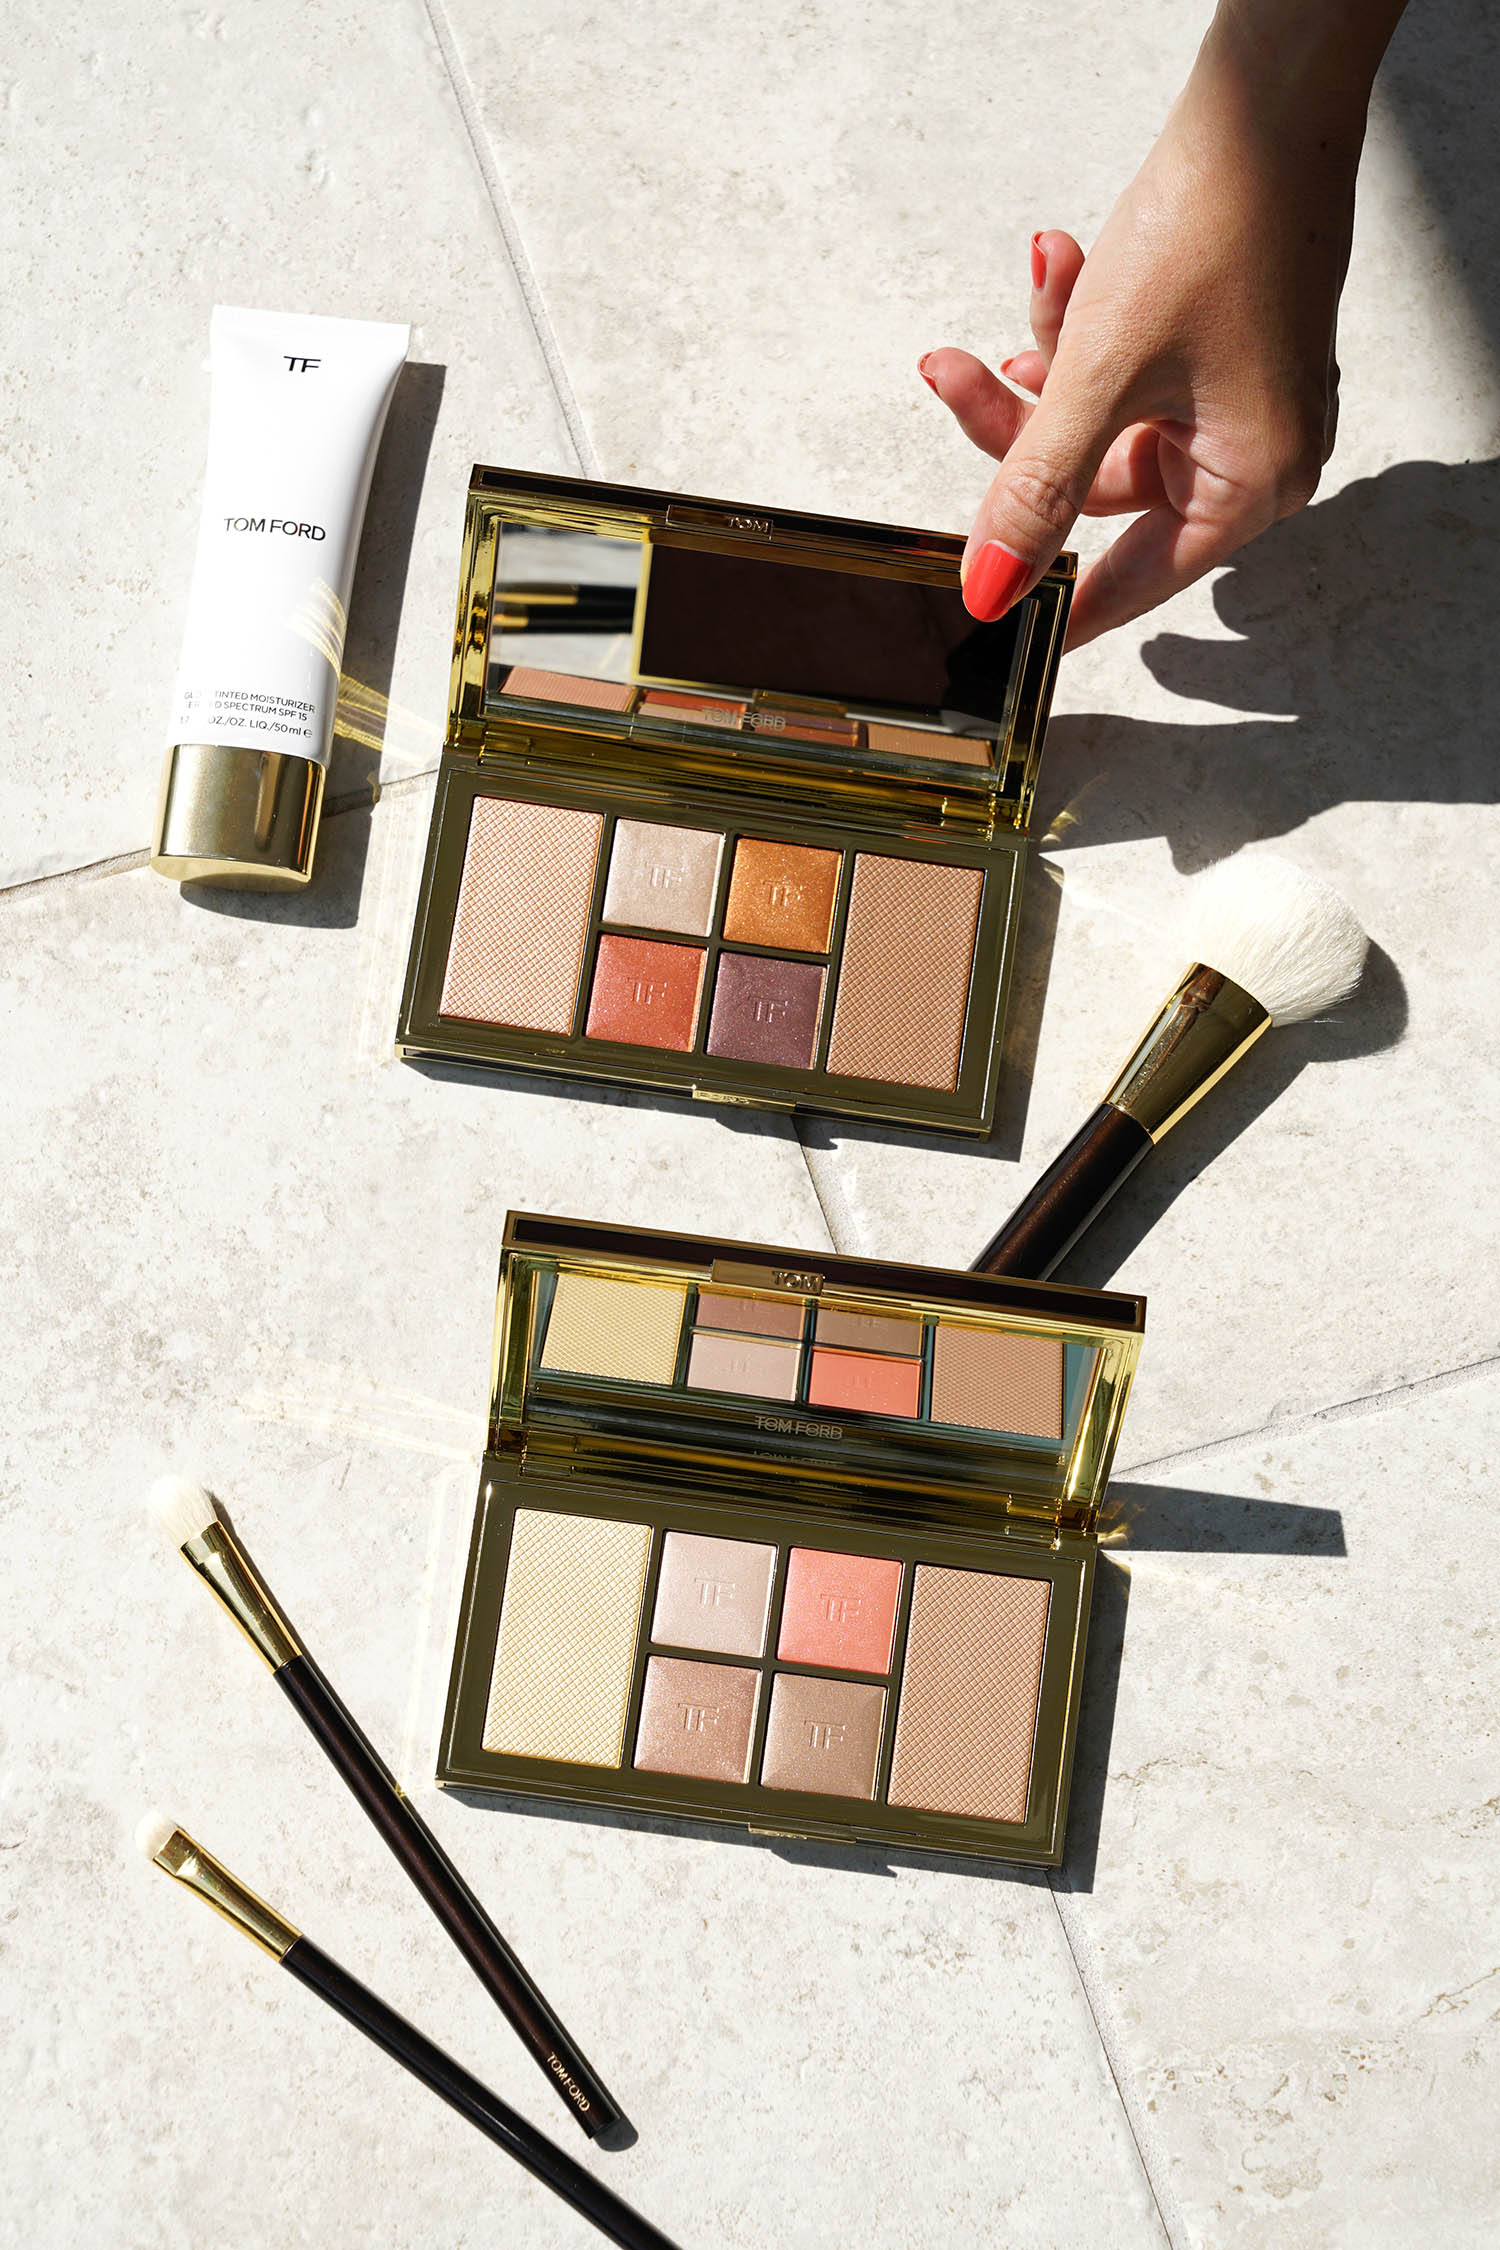 Tom Ford Beauty Archives - Page 2 of 10 - The Beauty Look Book